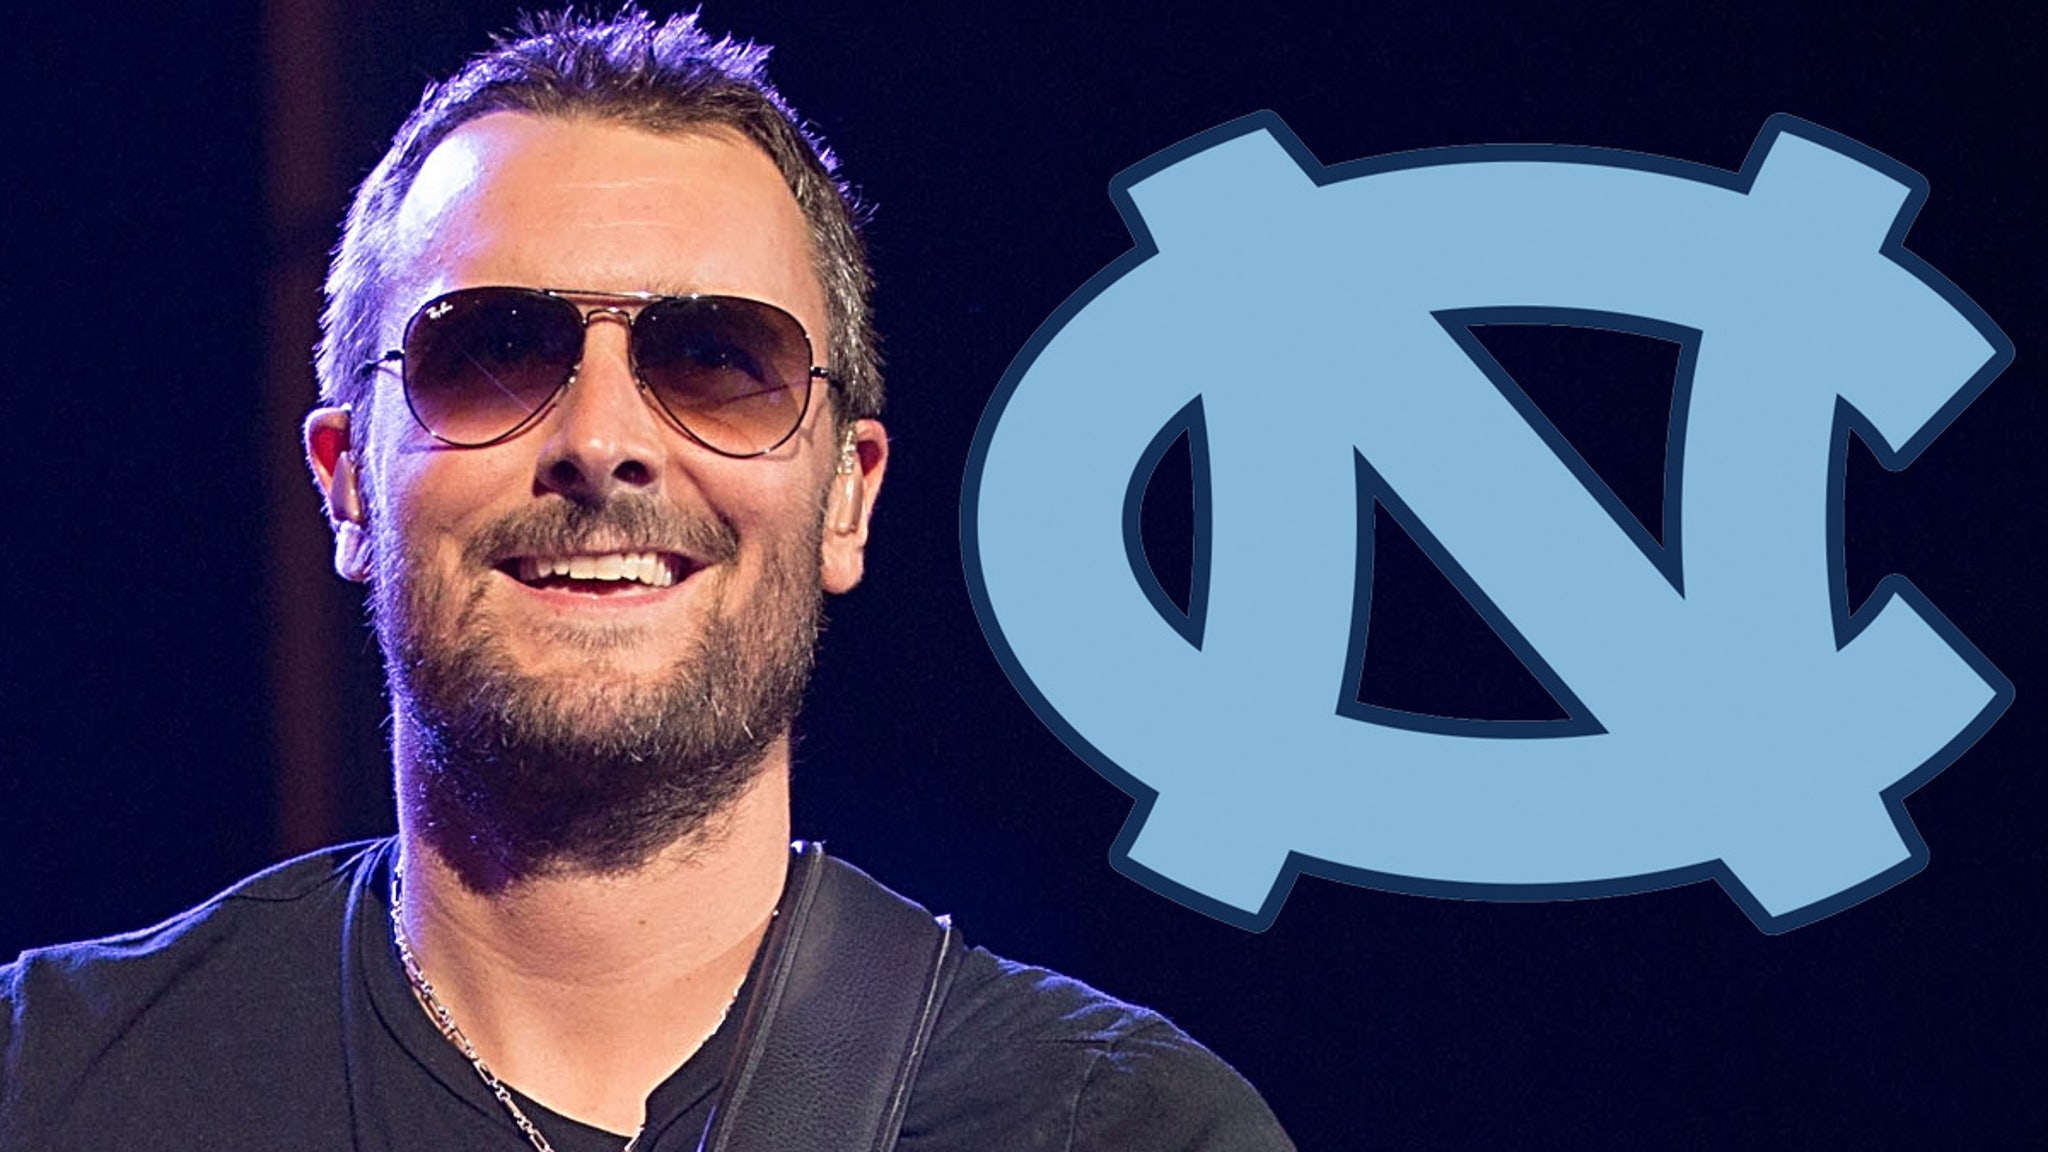 Eric Church Offers Free Concert After Canceling Show For UNC Vs. Duke Game thumbnail